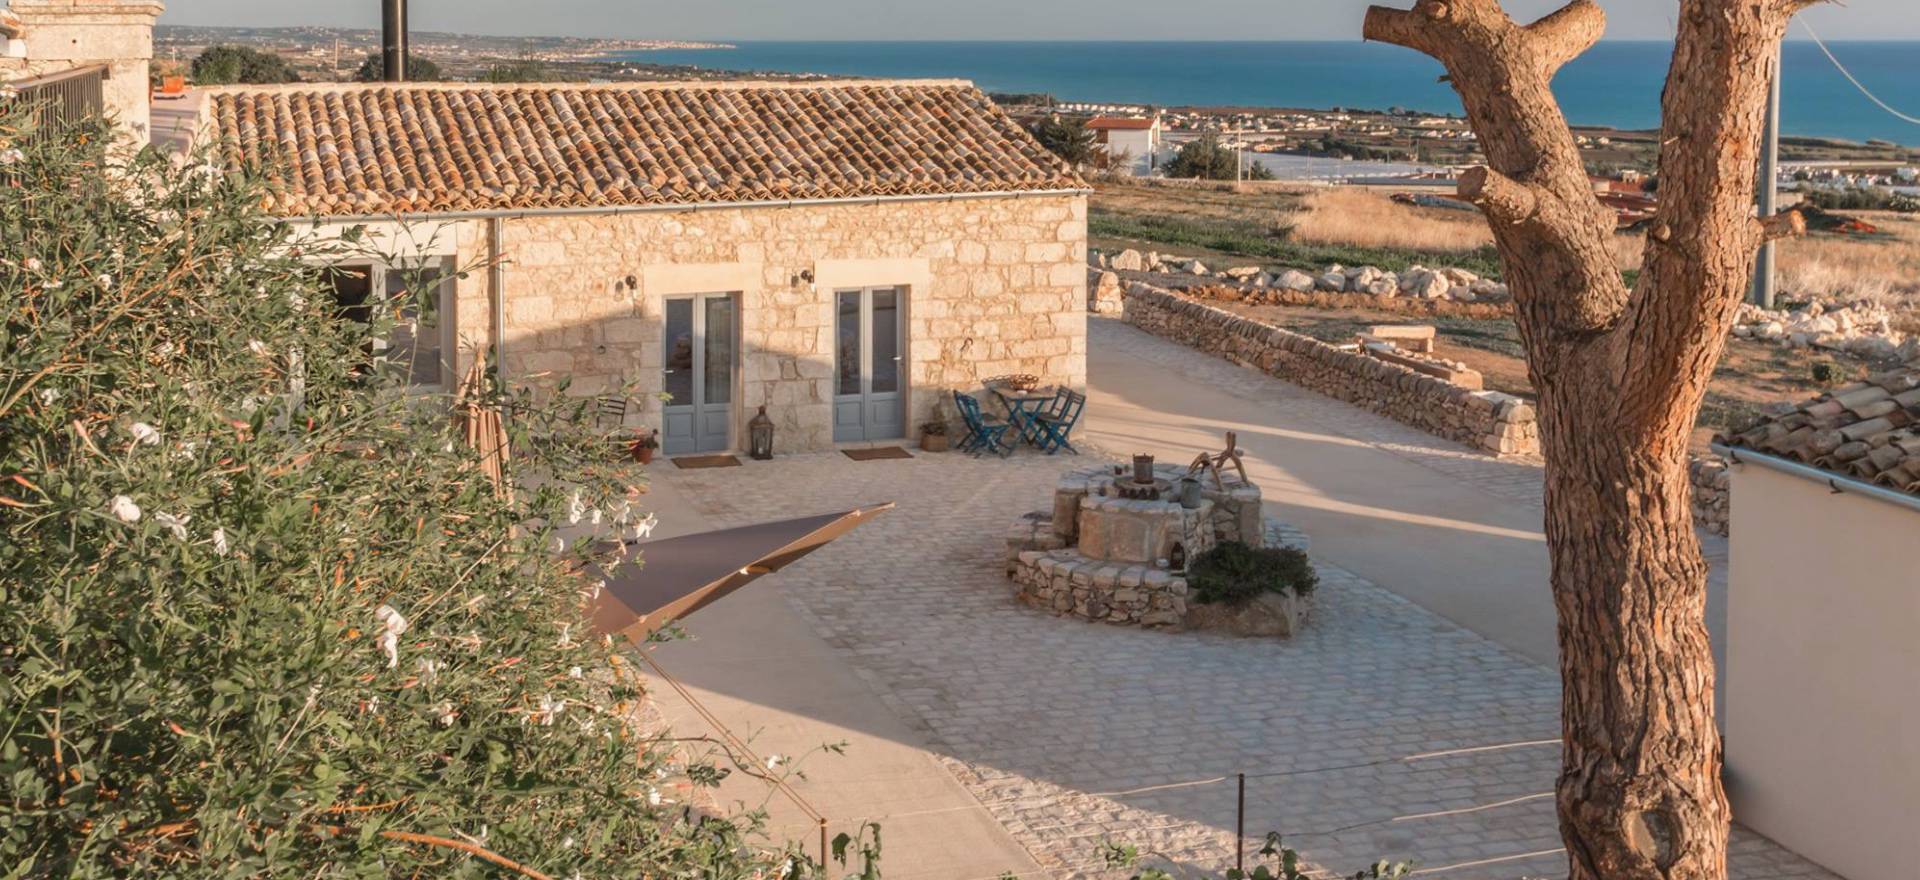 Agriturismo Sicily Great Sicilian hospitality and sea views!